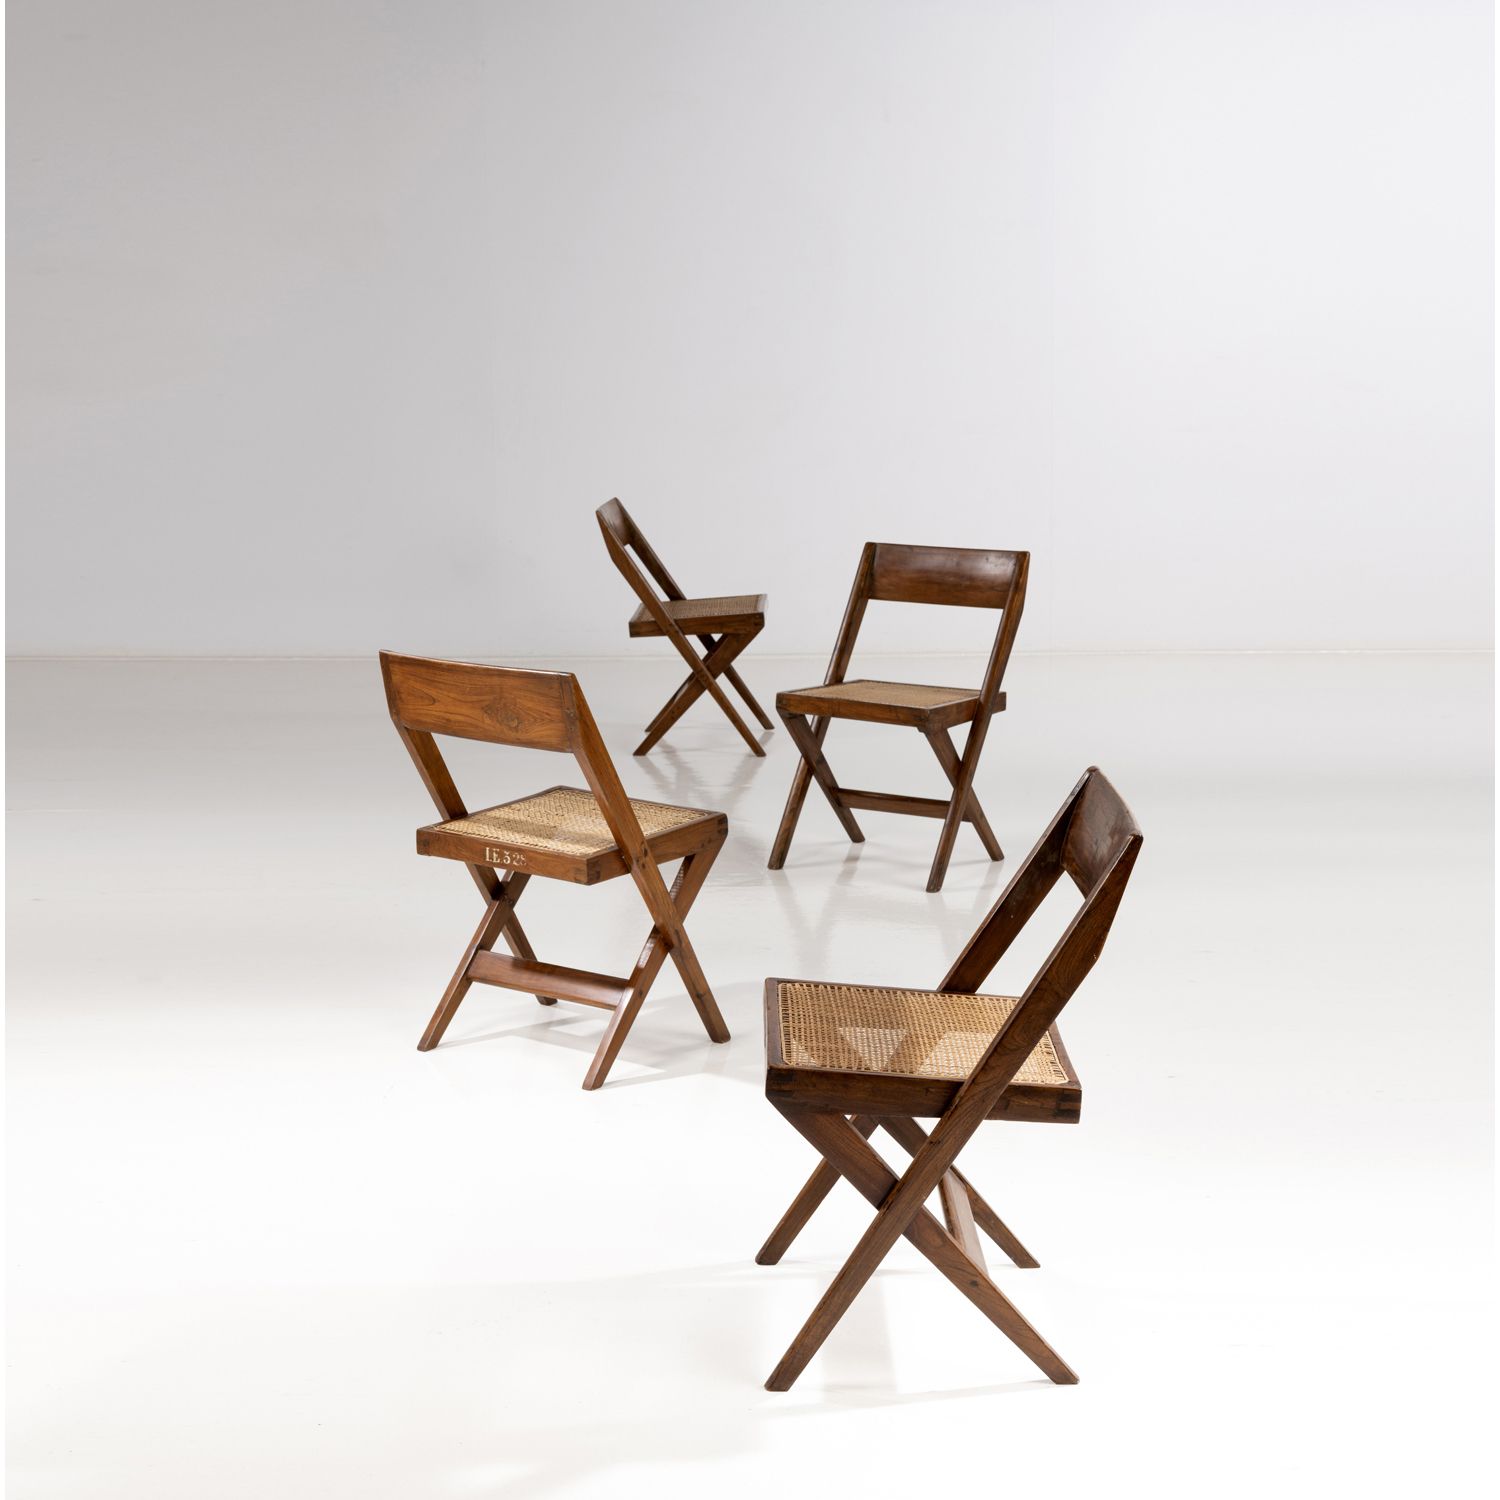 Null ƒ Pierre Jeanneret (1896-1967)

Set of four 'Library chairs'

Teak and cani&hellip;